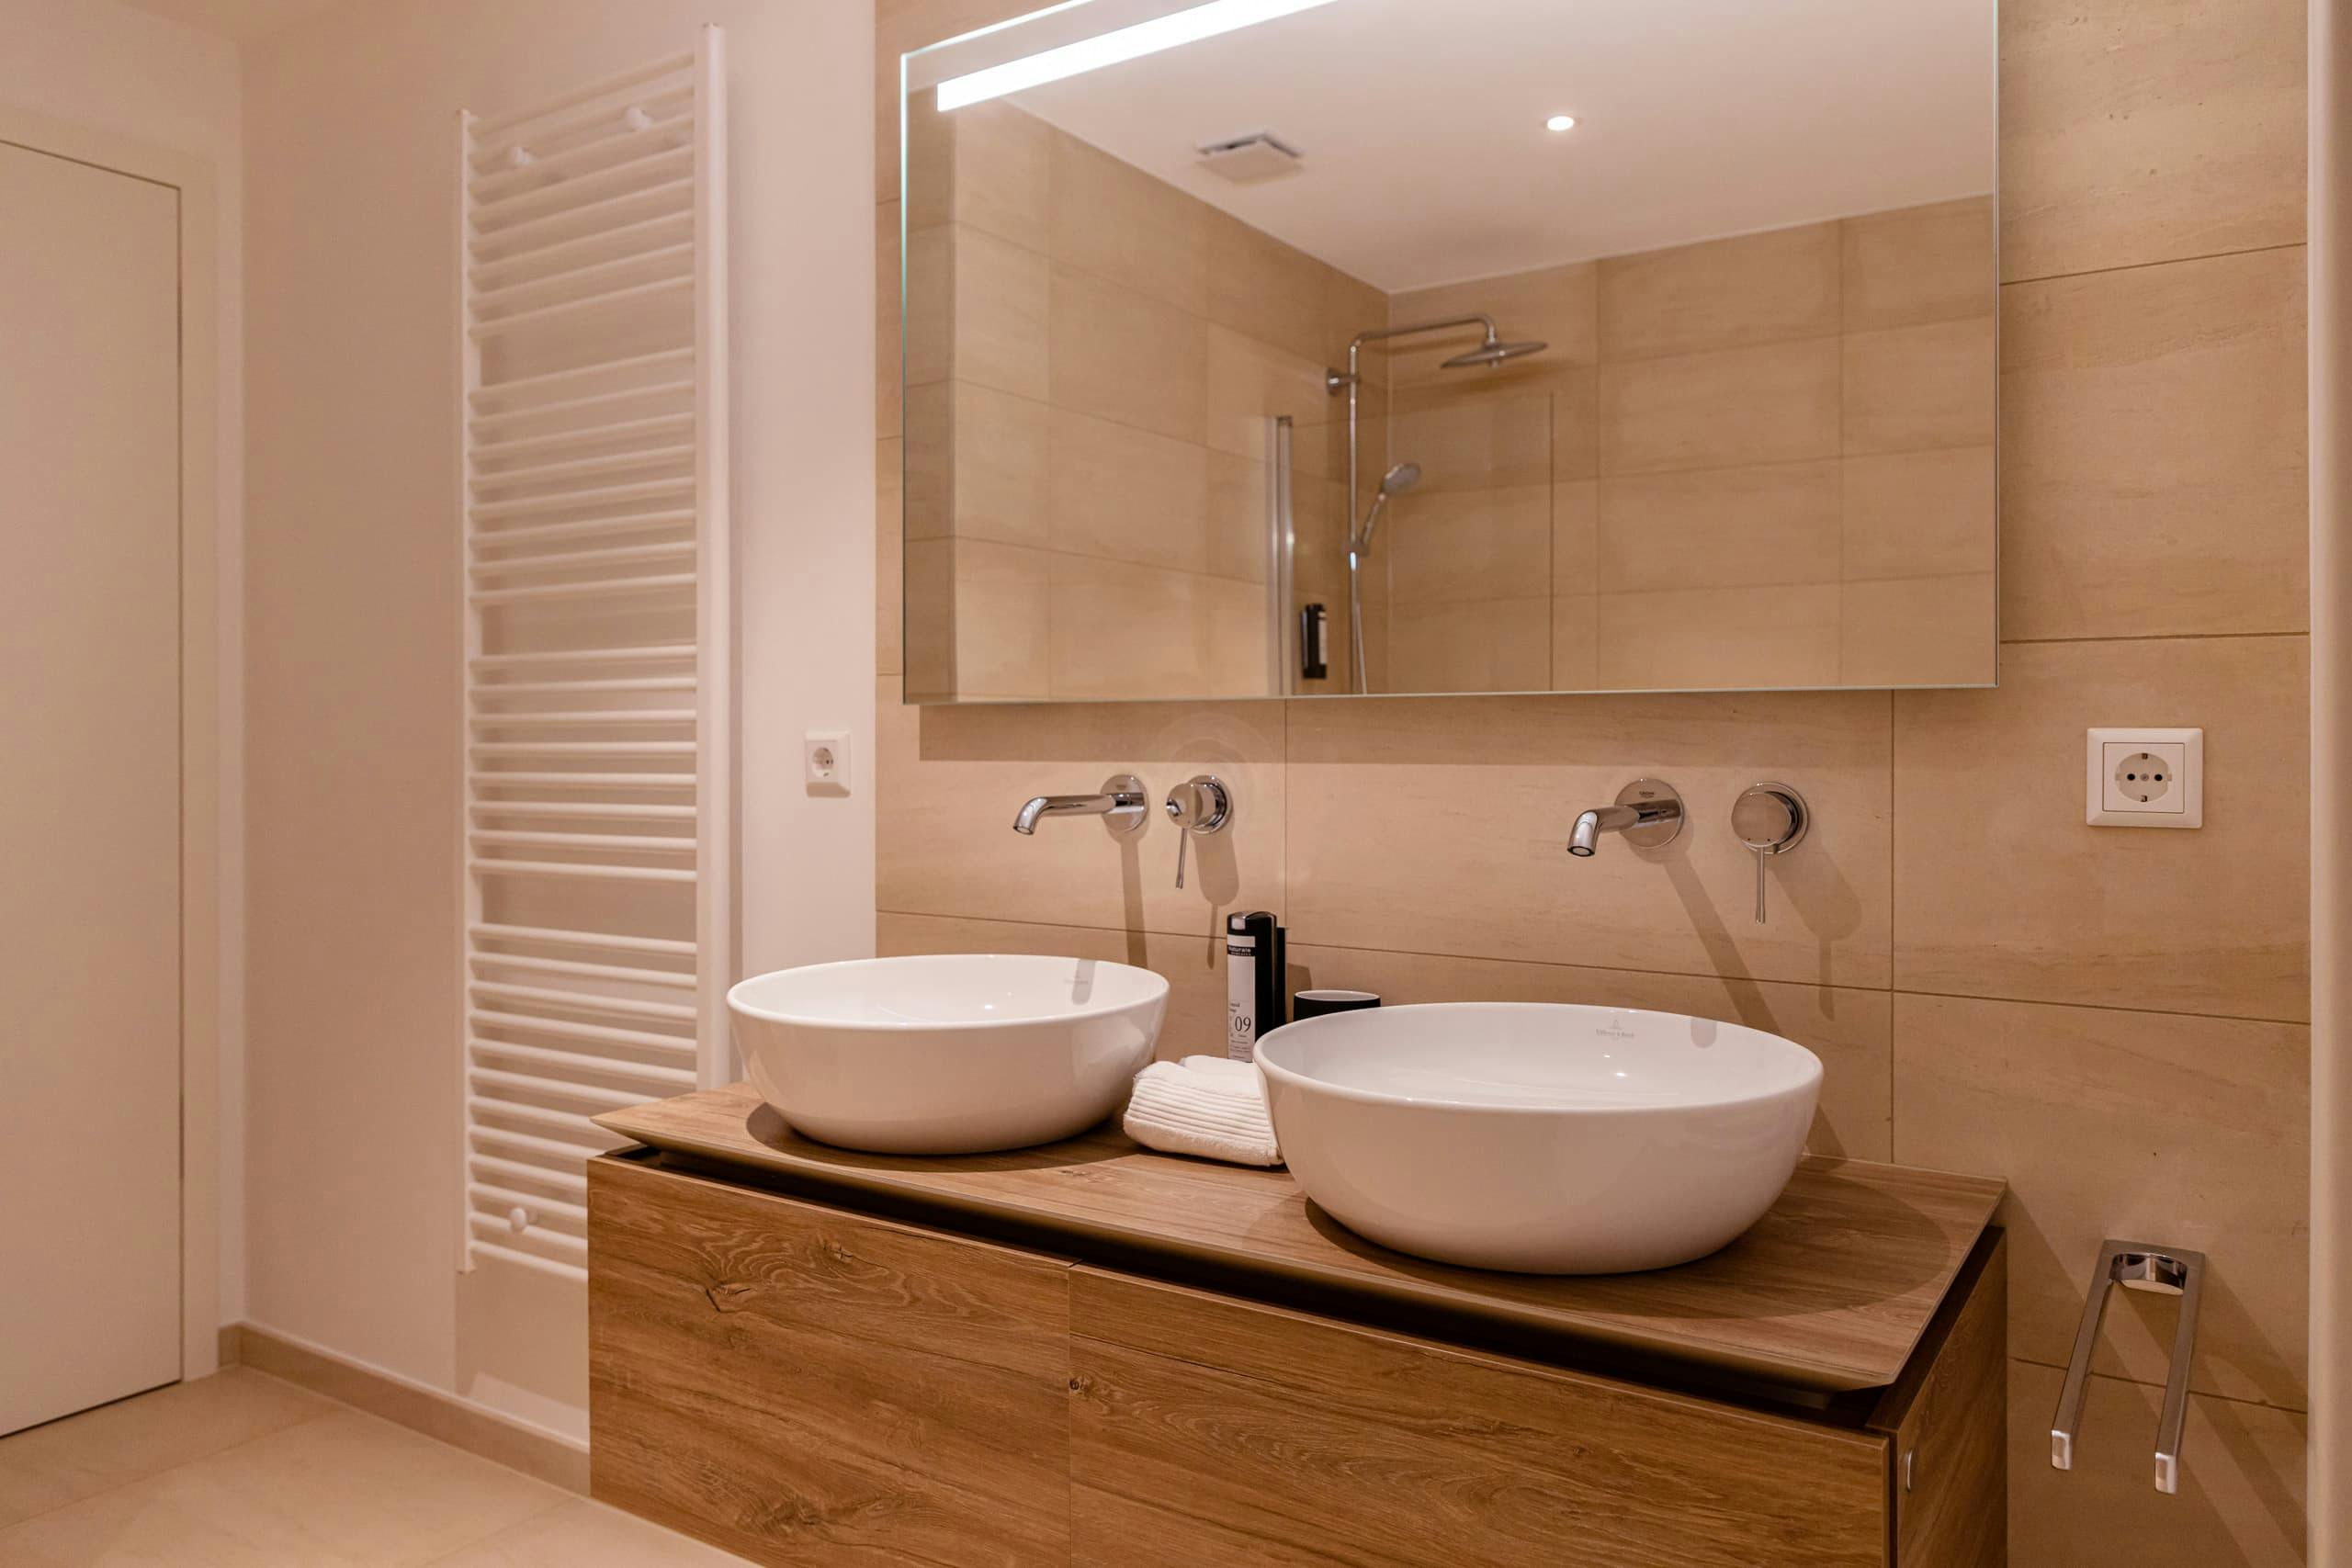 Bathroom with two sinks, one next to the other, and a heating radiator on the left. Above the sinks there is a mirror, and on its right, an electricity plug and towels hanger.